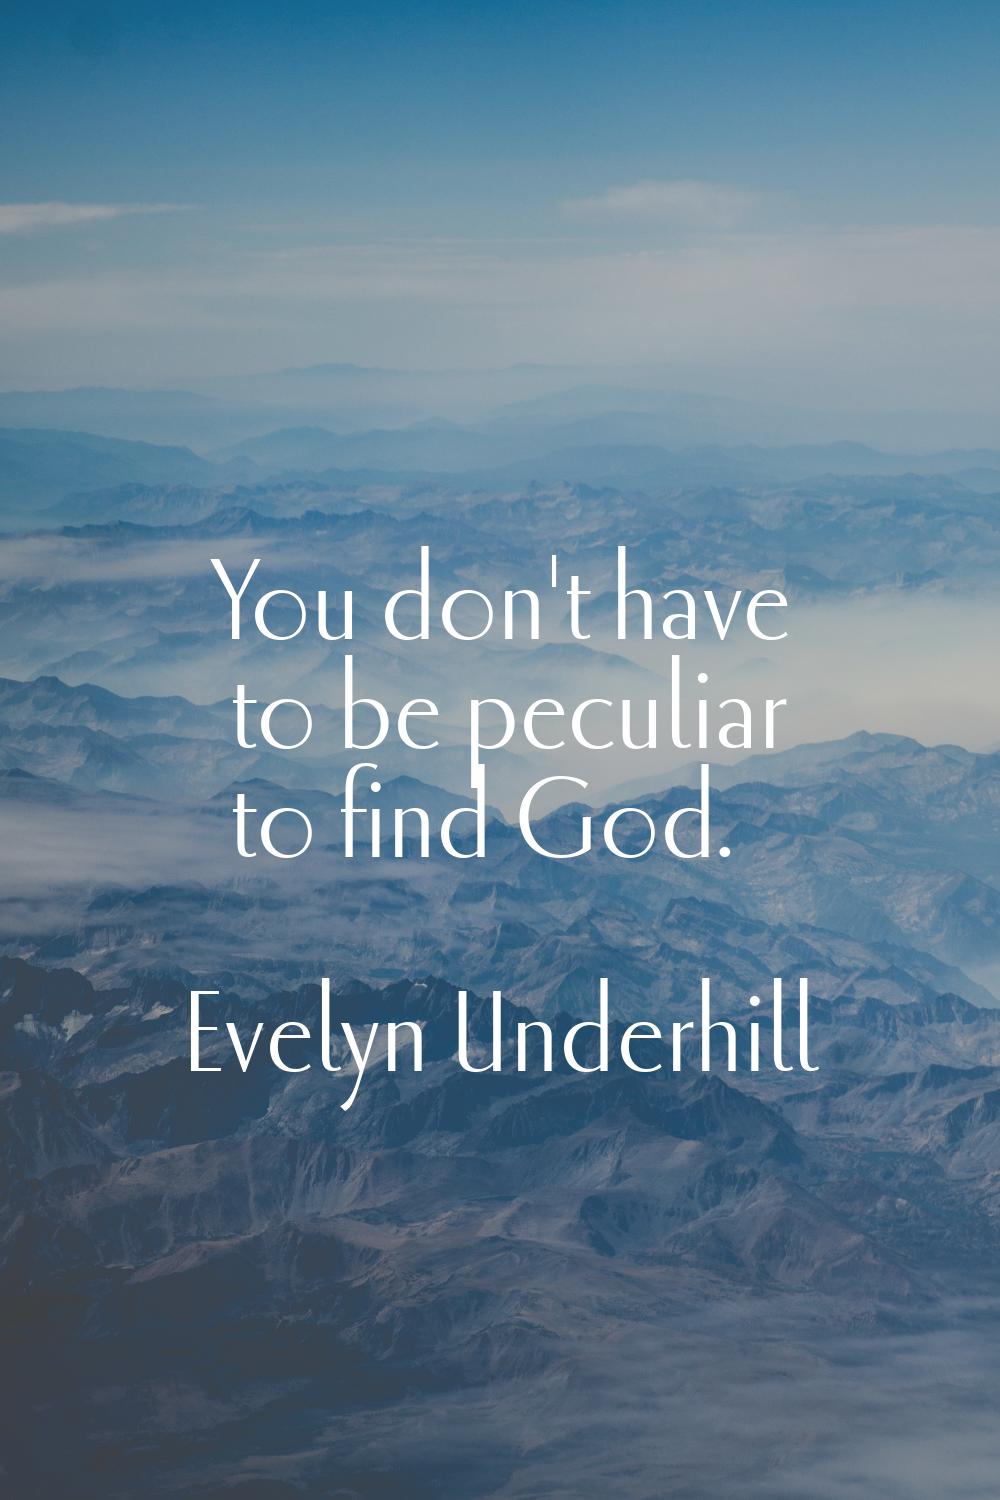 You don't have to be peculiar to find God.